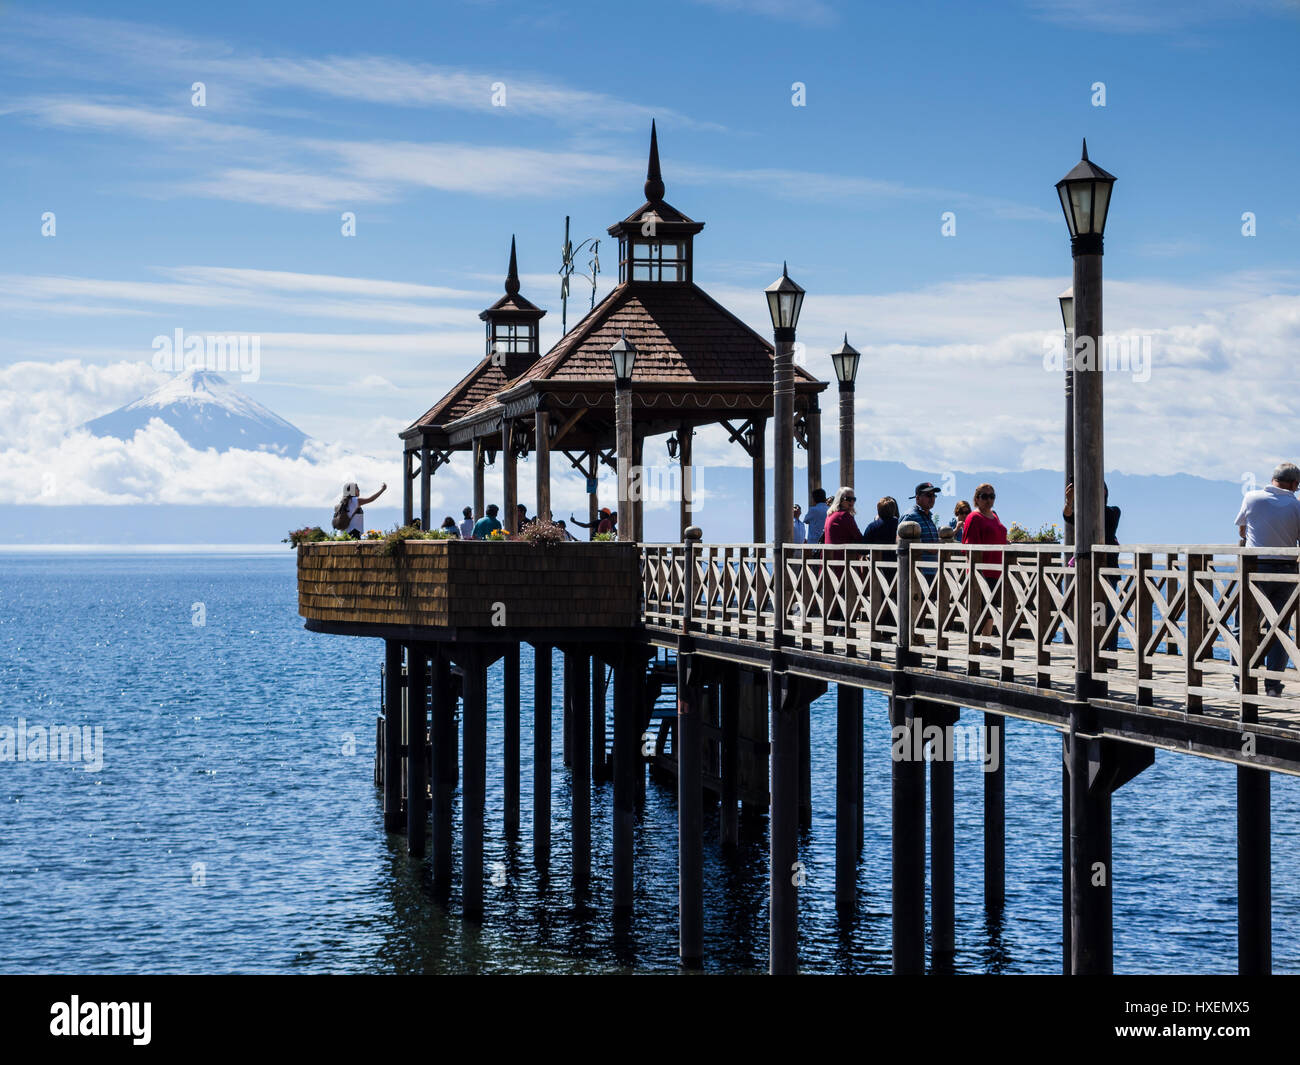 View over pier towards volcano Osorno, tourists on the pier taking pictures, village Frutilliar, at lake lago llanquihue, chilenean lake district, Chi Stock Photo